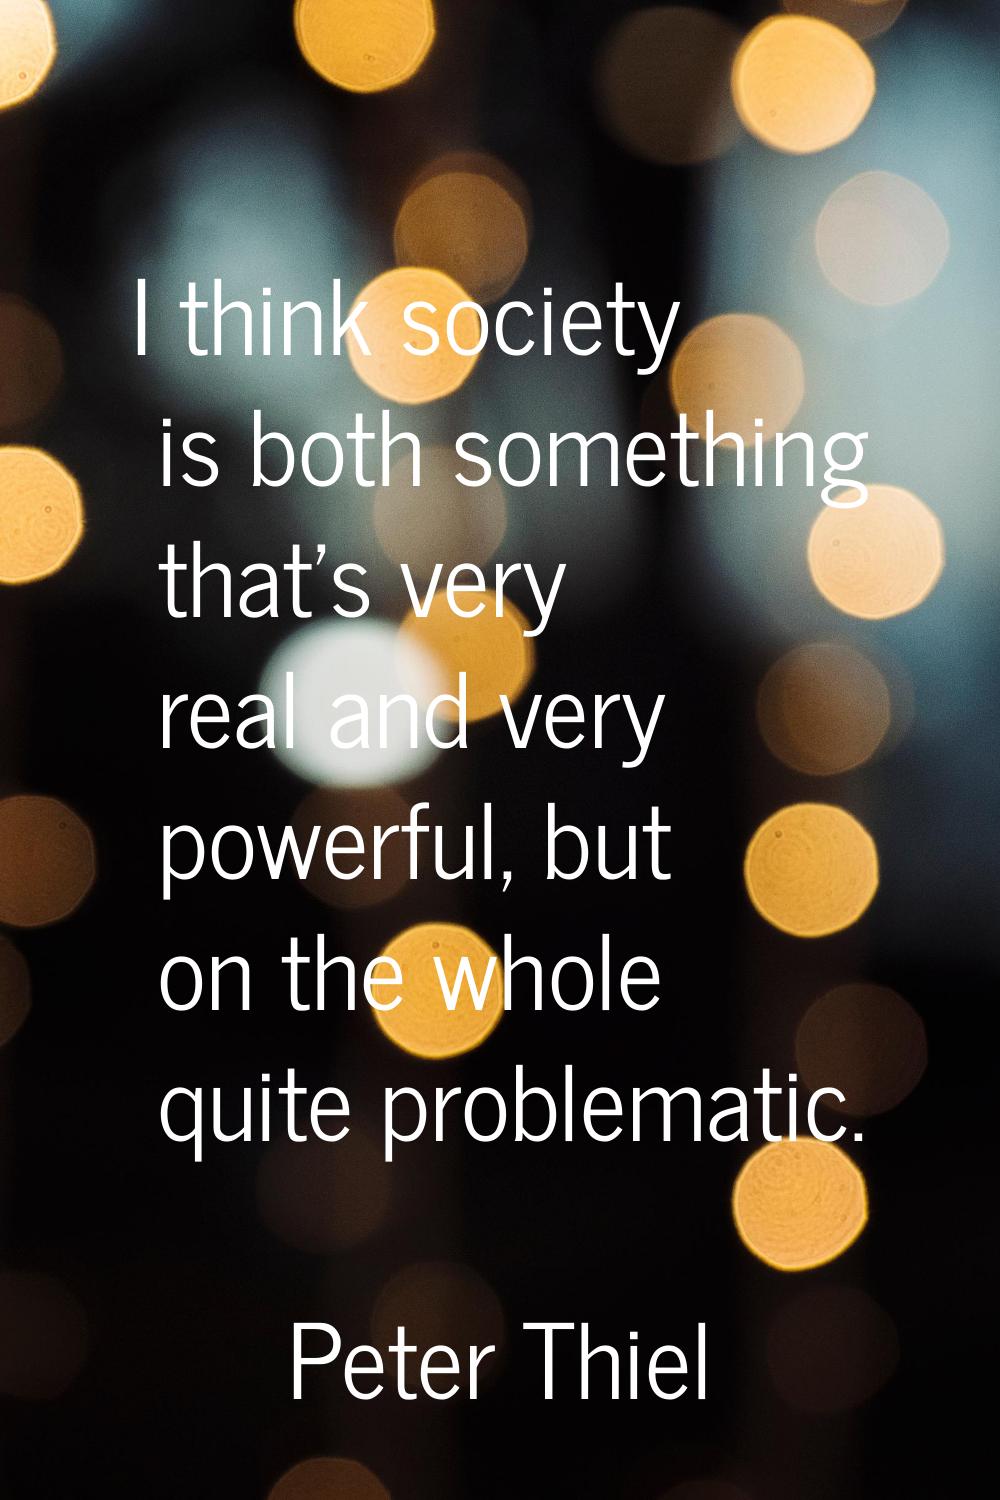 I think society is both something that's very real and very powerful, but on the whole quite proble